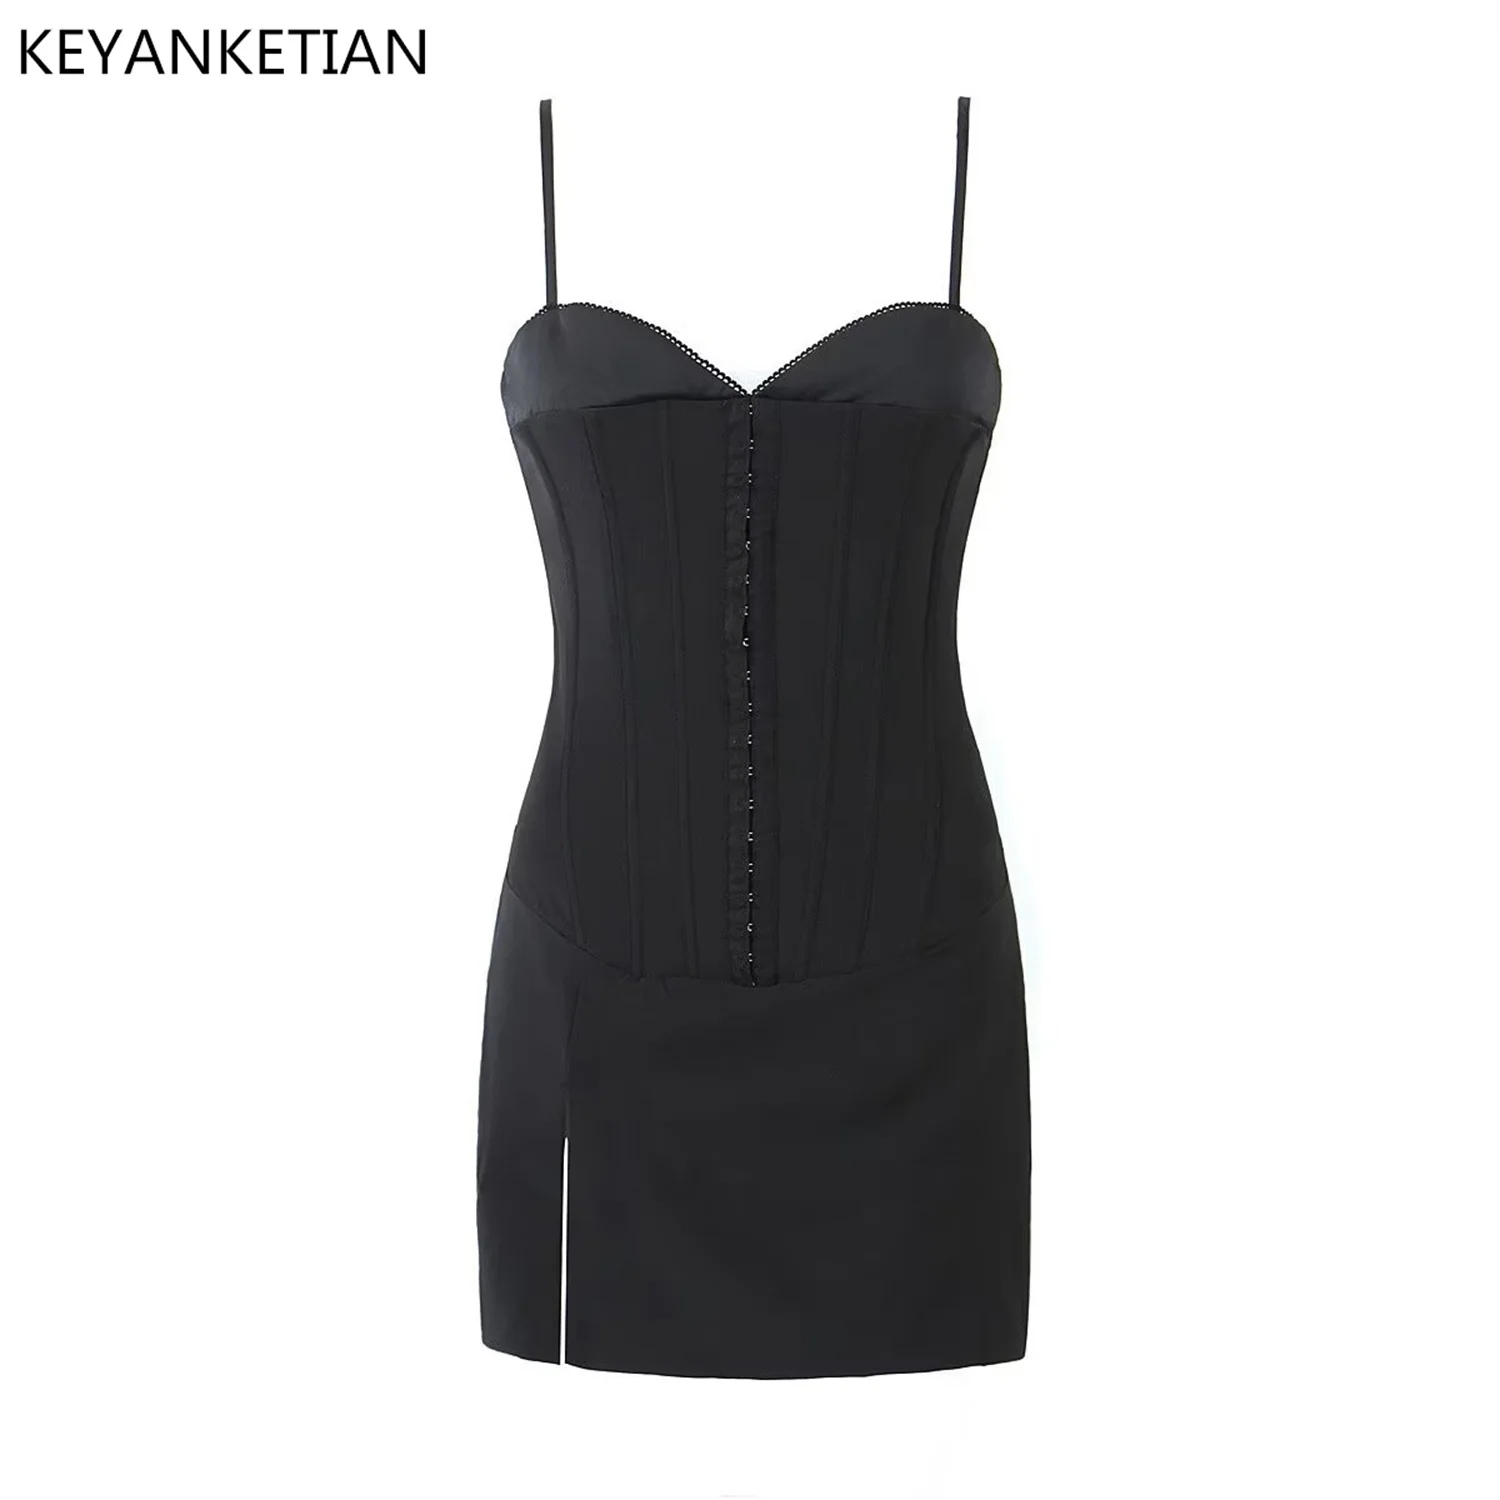 

KEYANKETIAN Summer New Buckle Style Tight Sling Dress Women Sexy Lace Embellished High Fanny Pack Hip Mini Skirt Black